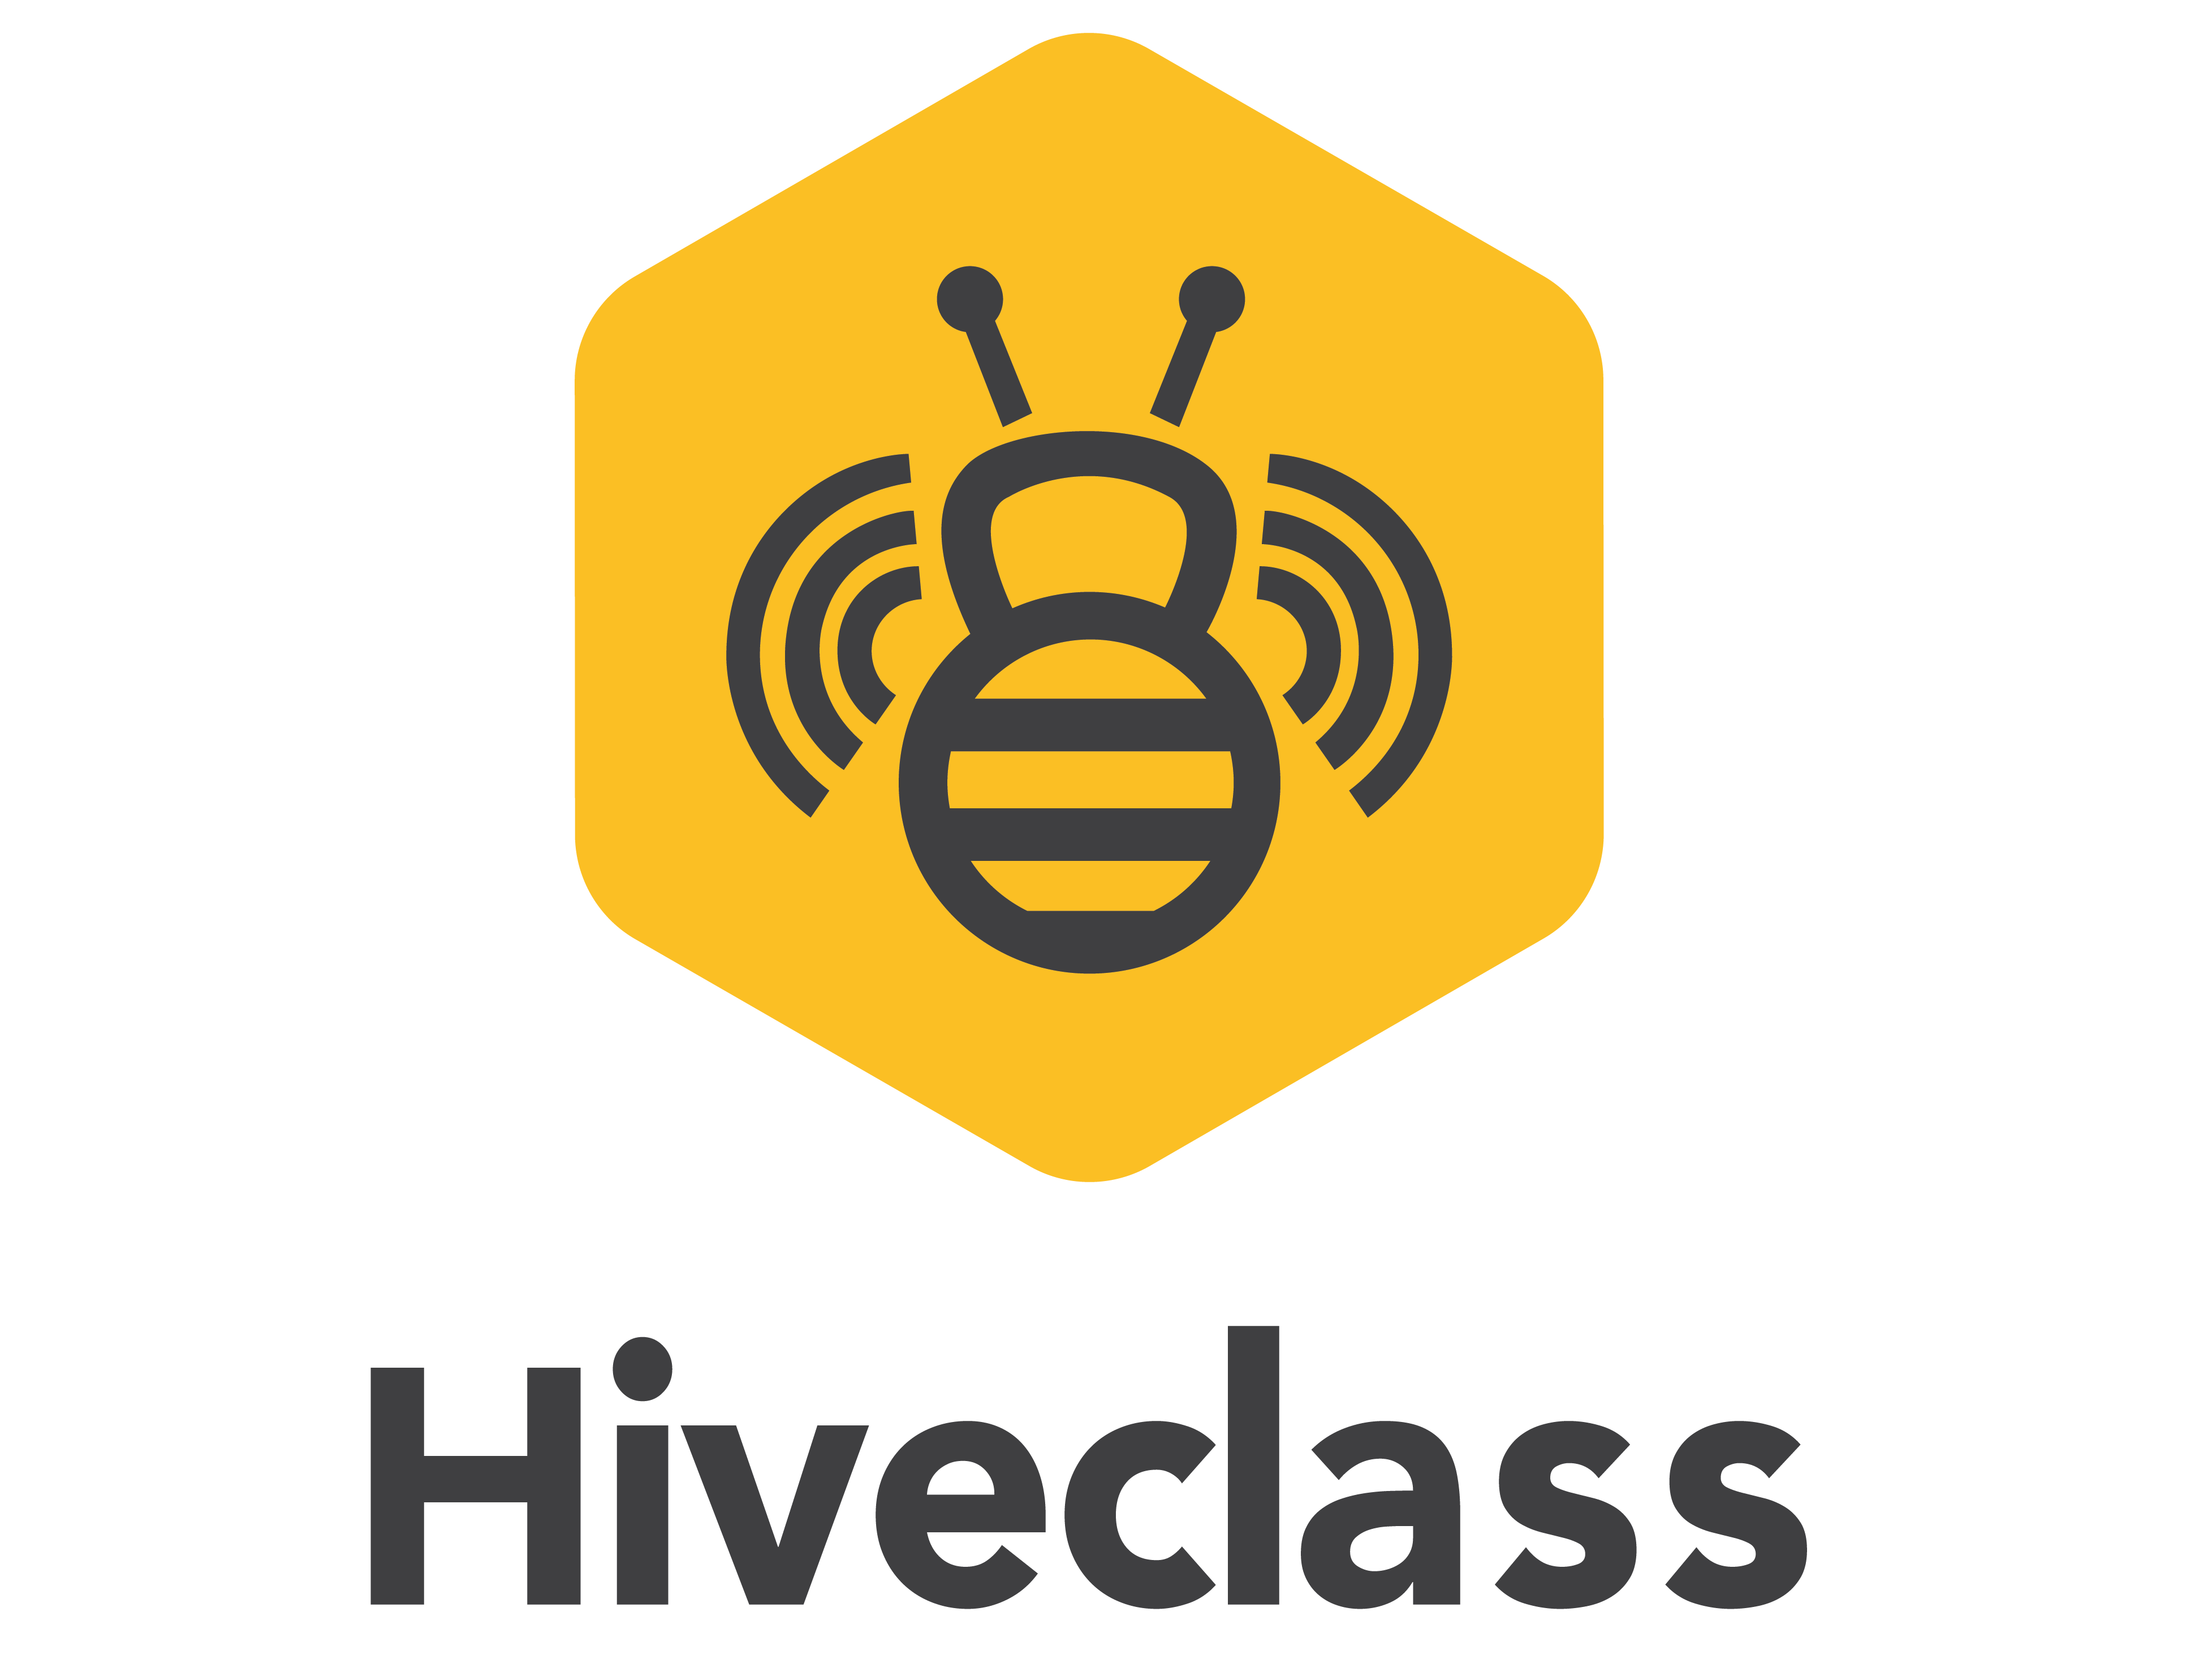 Logo of Hiveclass with a bee